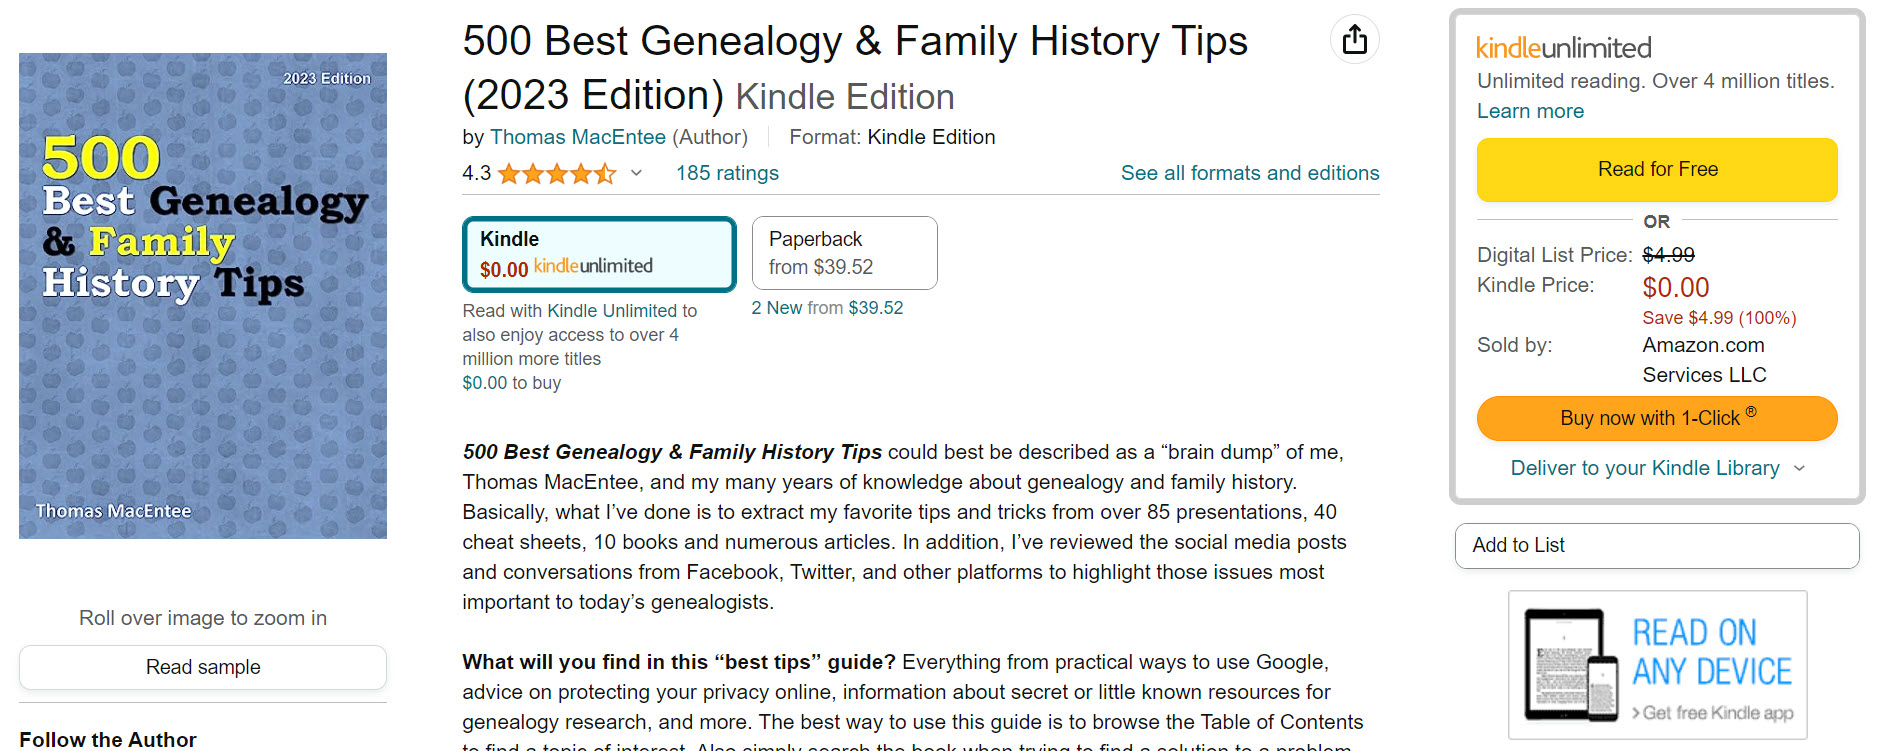 The easiest way to get your copy of 500 Best Genealogy & Family History Tips is to click the links above. Or if you search on Amazon for the book, you'll see either Add to Cart or Buy now with 1-Click® . . . just click either of those buttons.